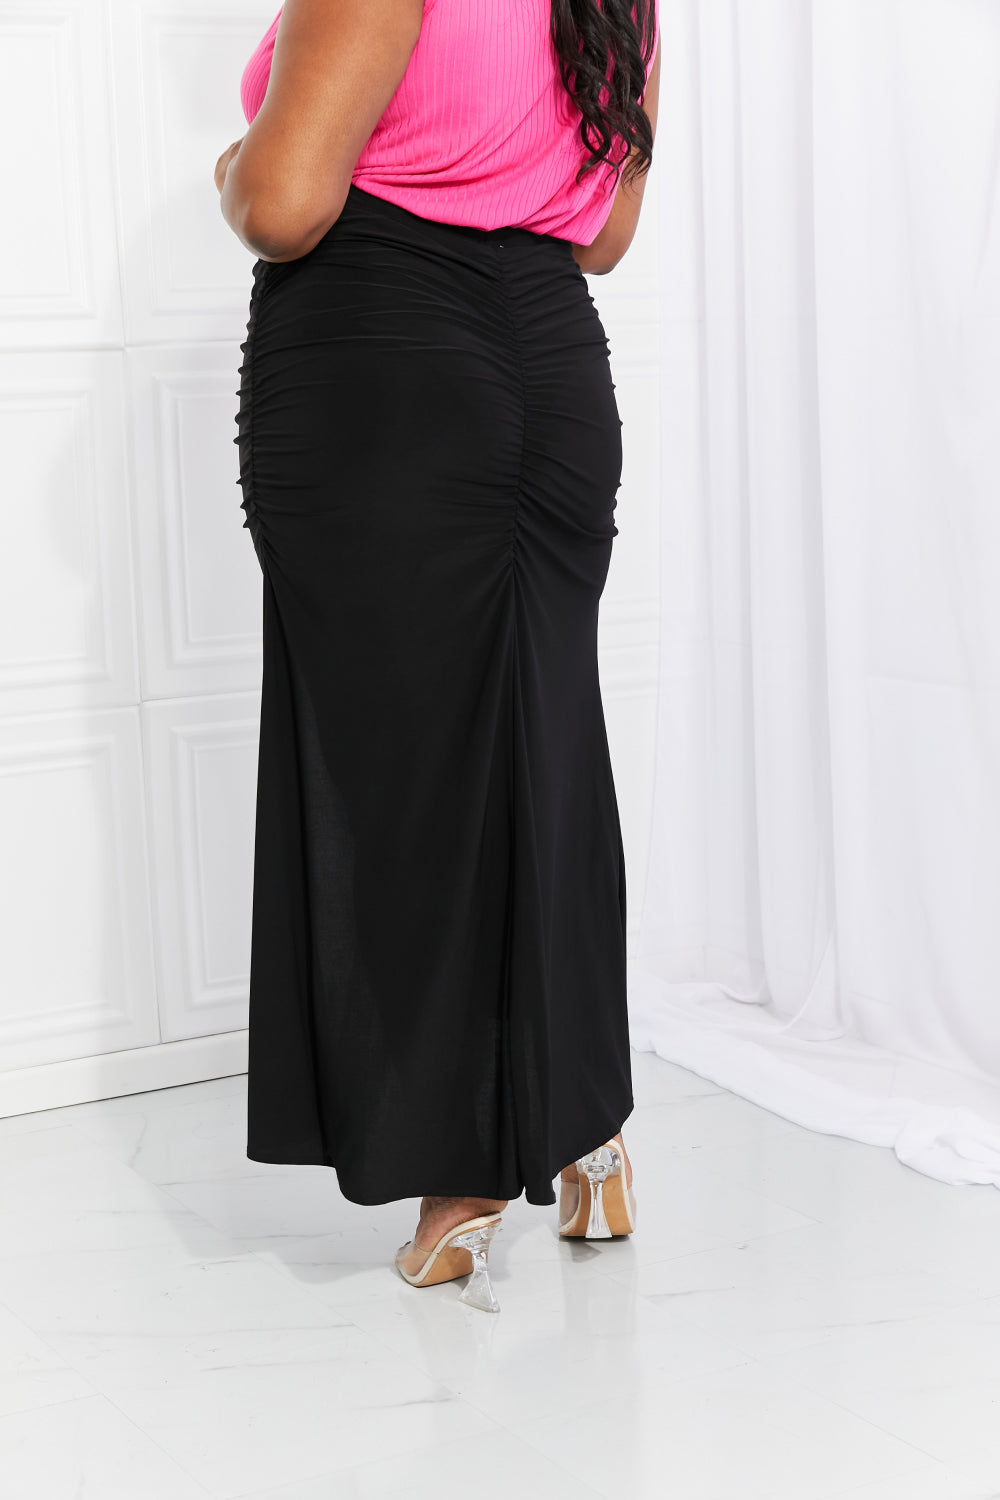 Full Size Up and Up Ruched Slit Maxi Skirt in Black - Bottoms - Skirts - 3 - 2024